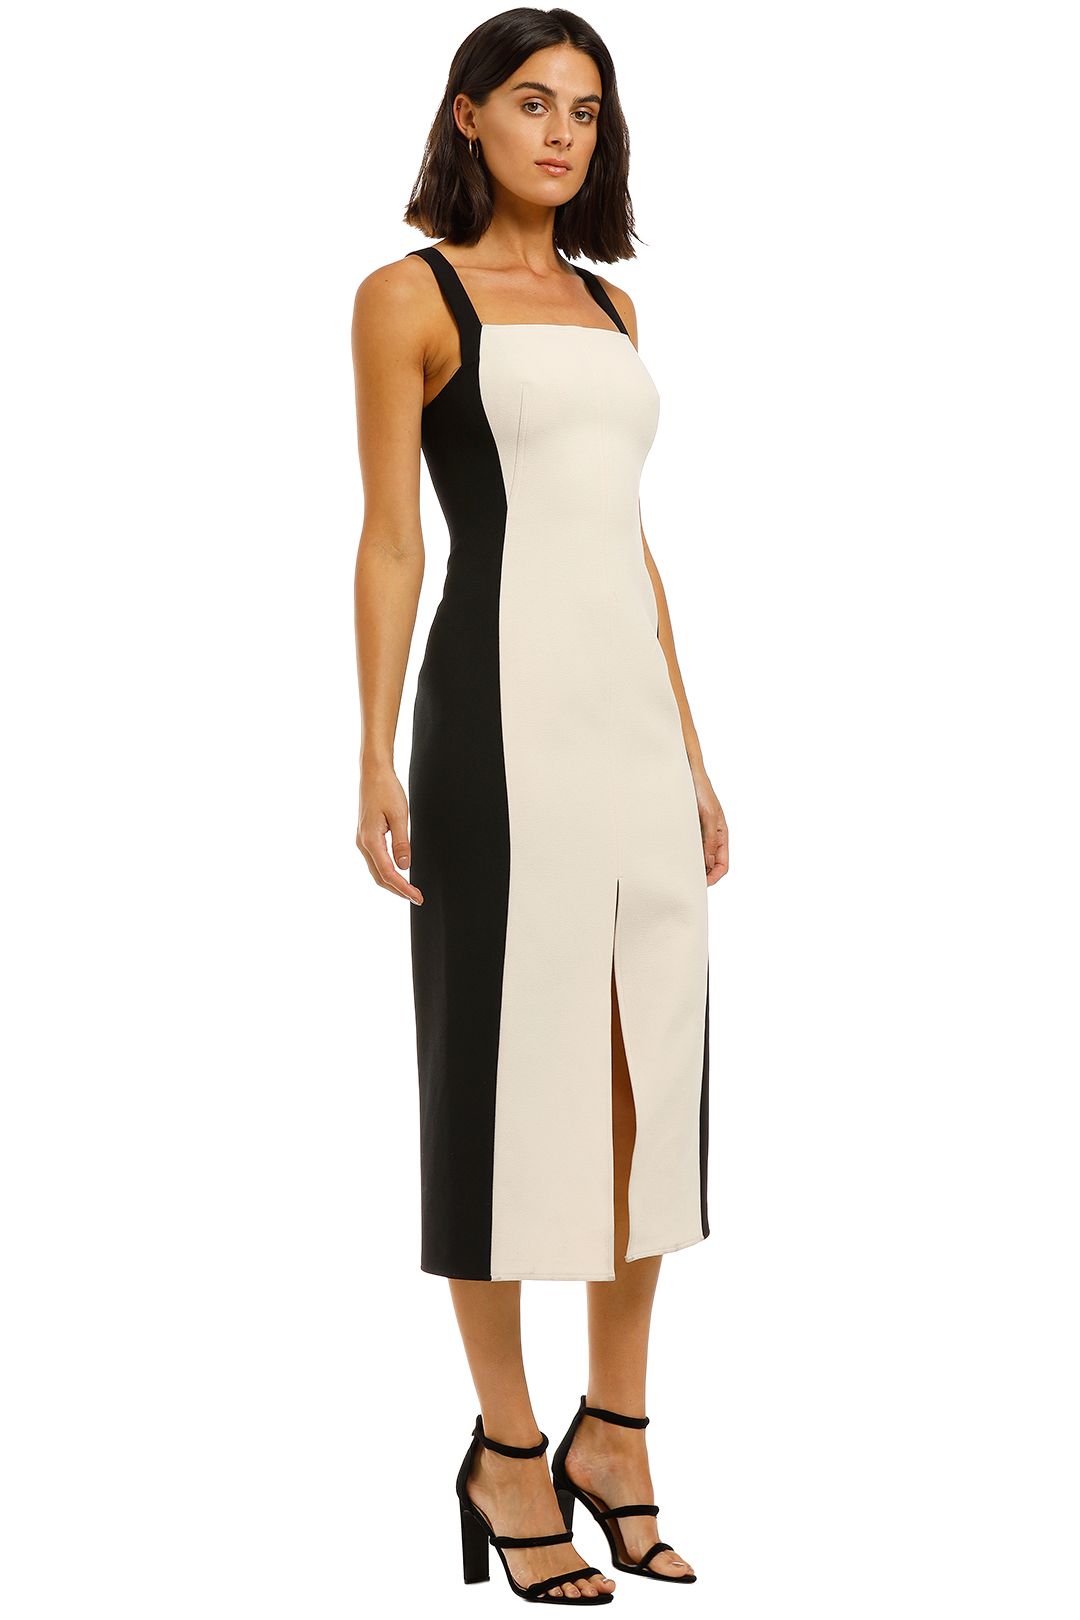 CMEO-Collective-Consumed-Sleeveless-Midi-Dress-Side